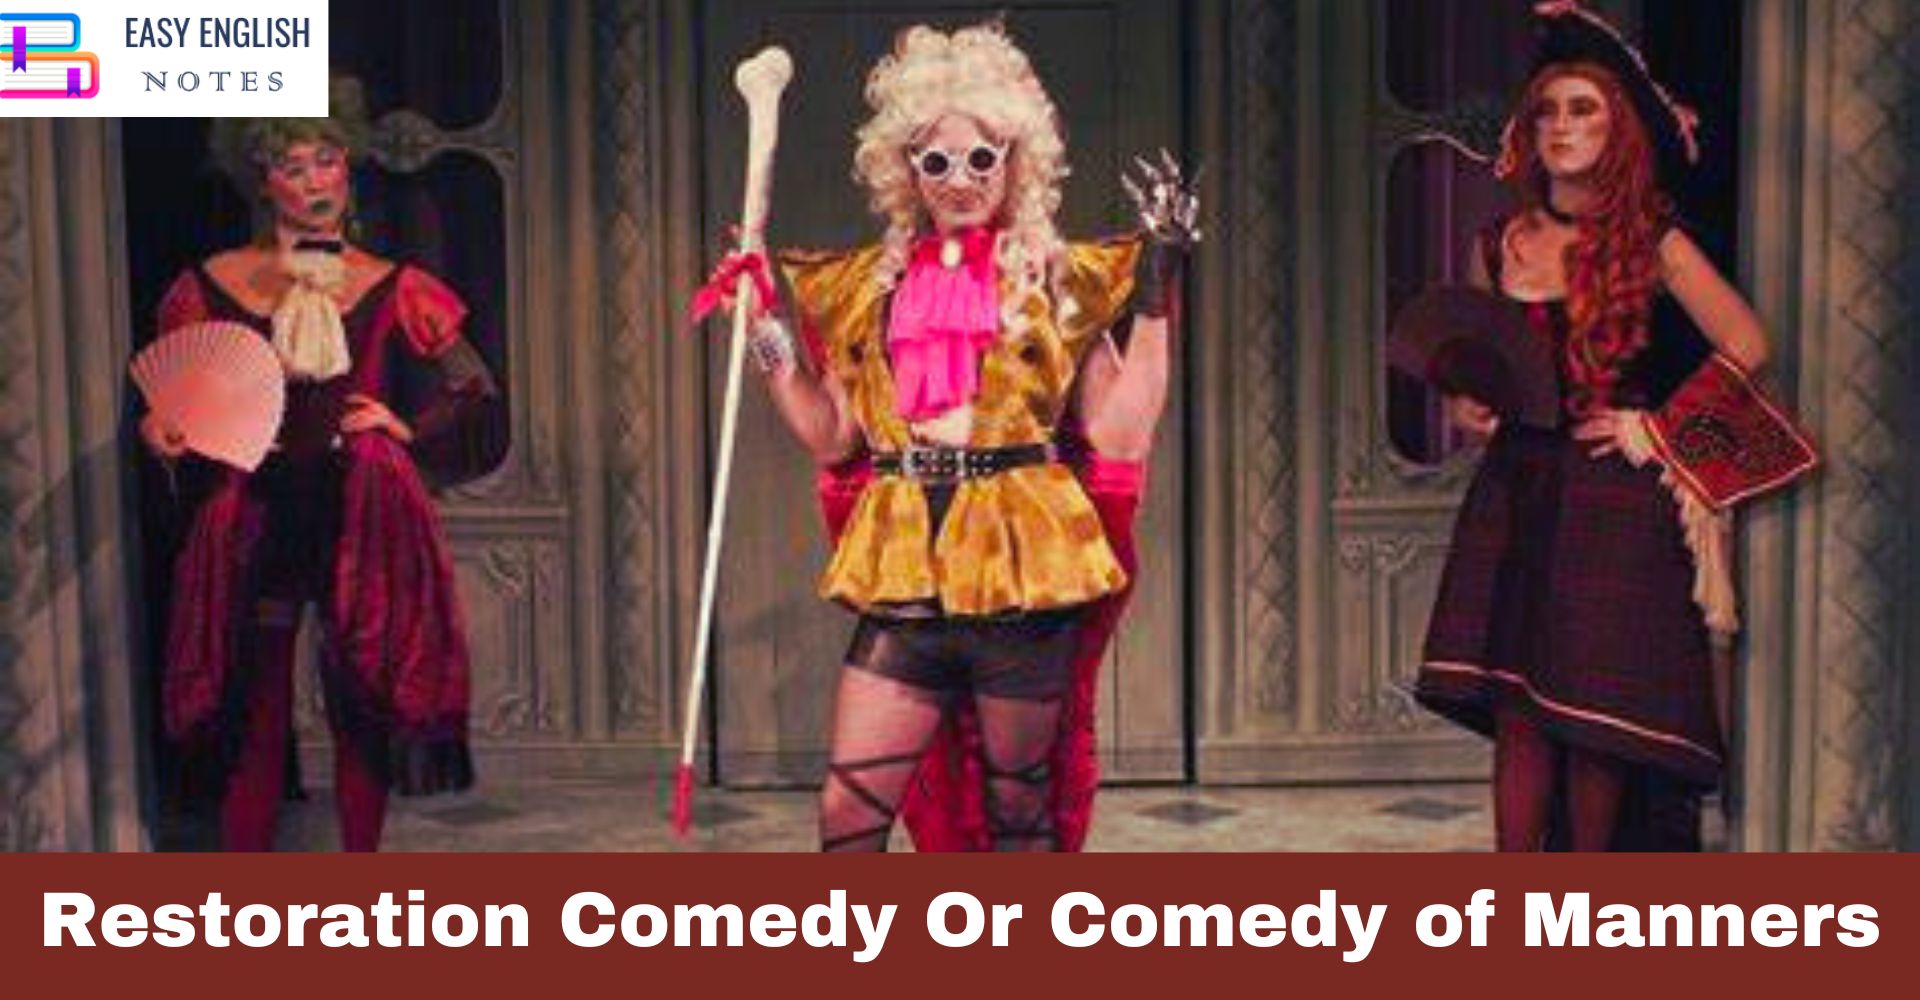 Restoration Comedy Or Comedy of Manners